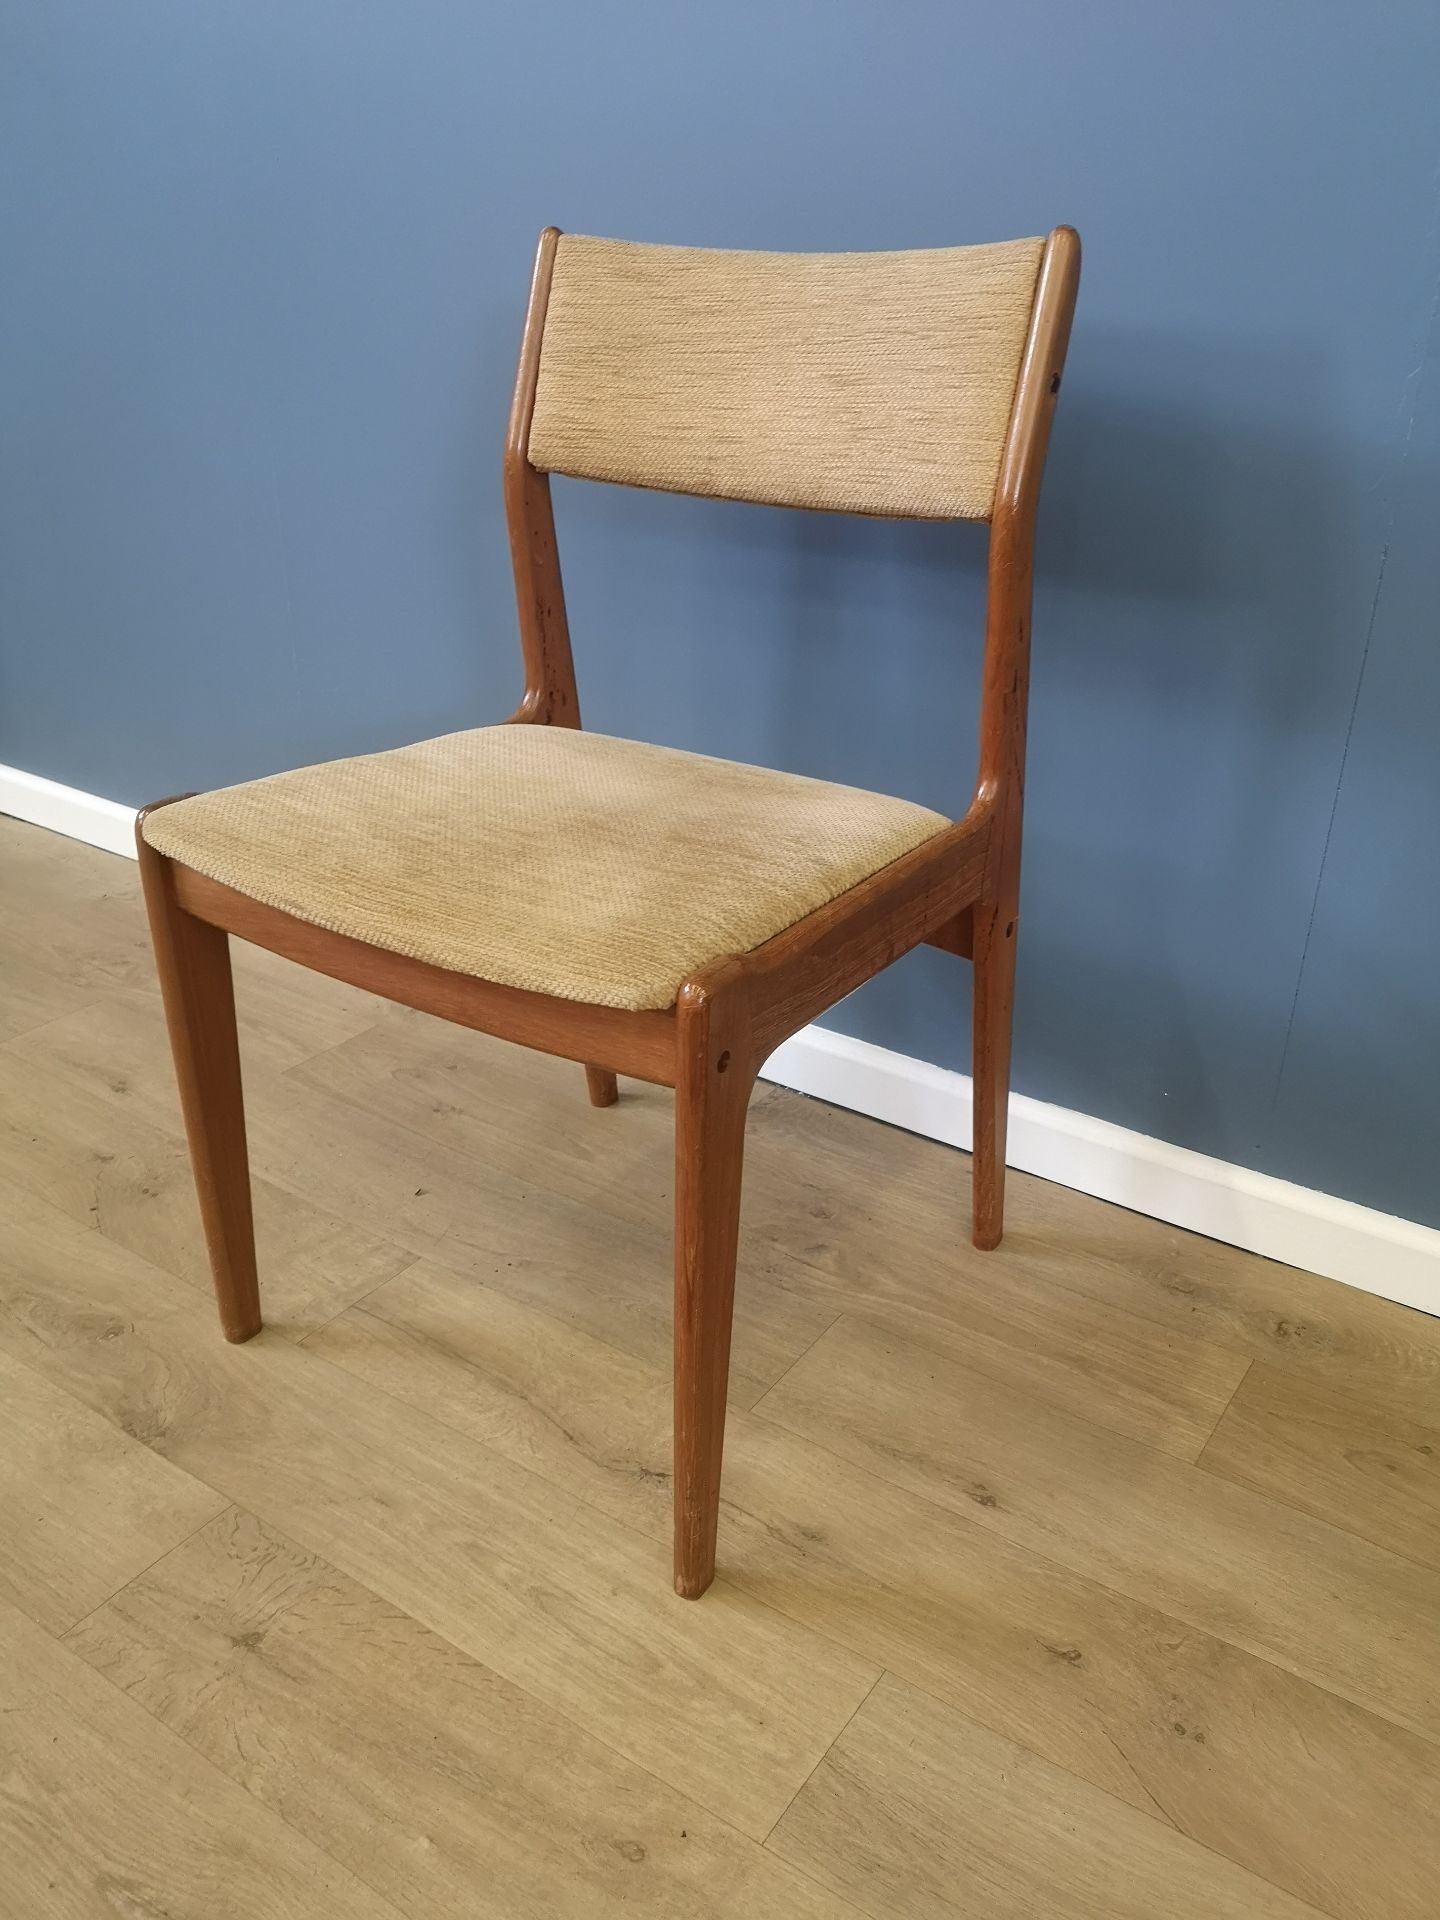 Set of six teak dining chairs - Image 3 of 4